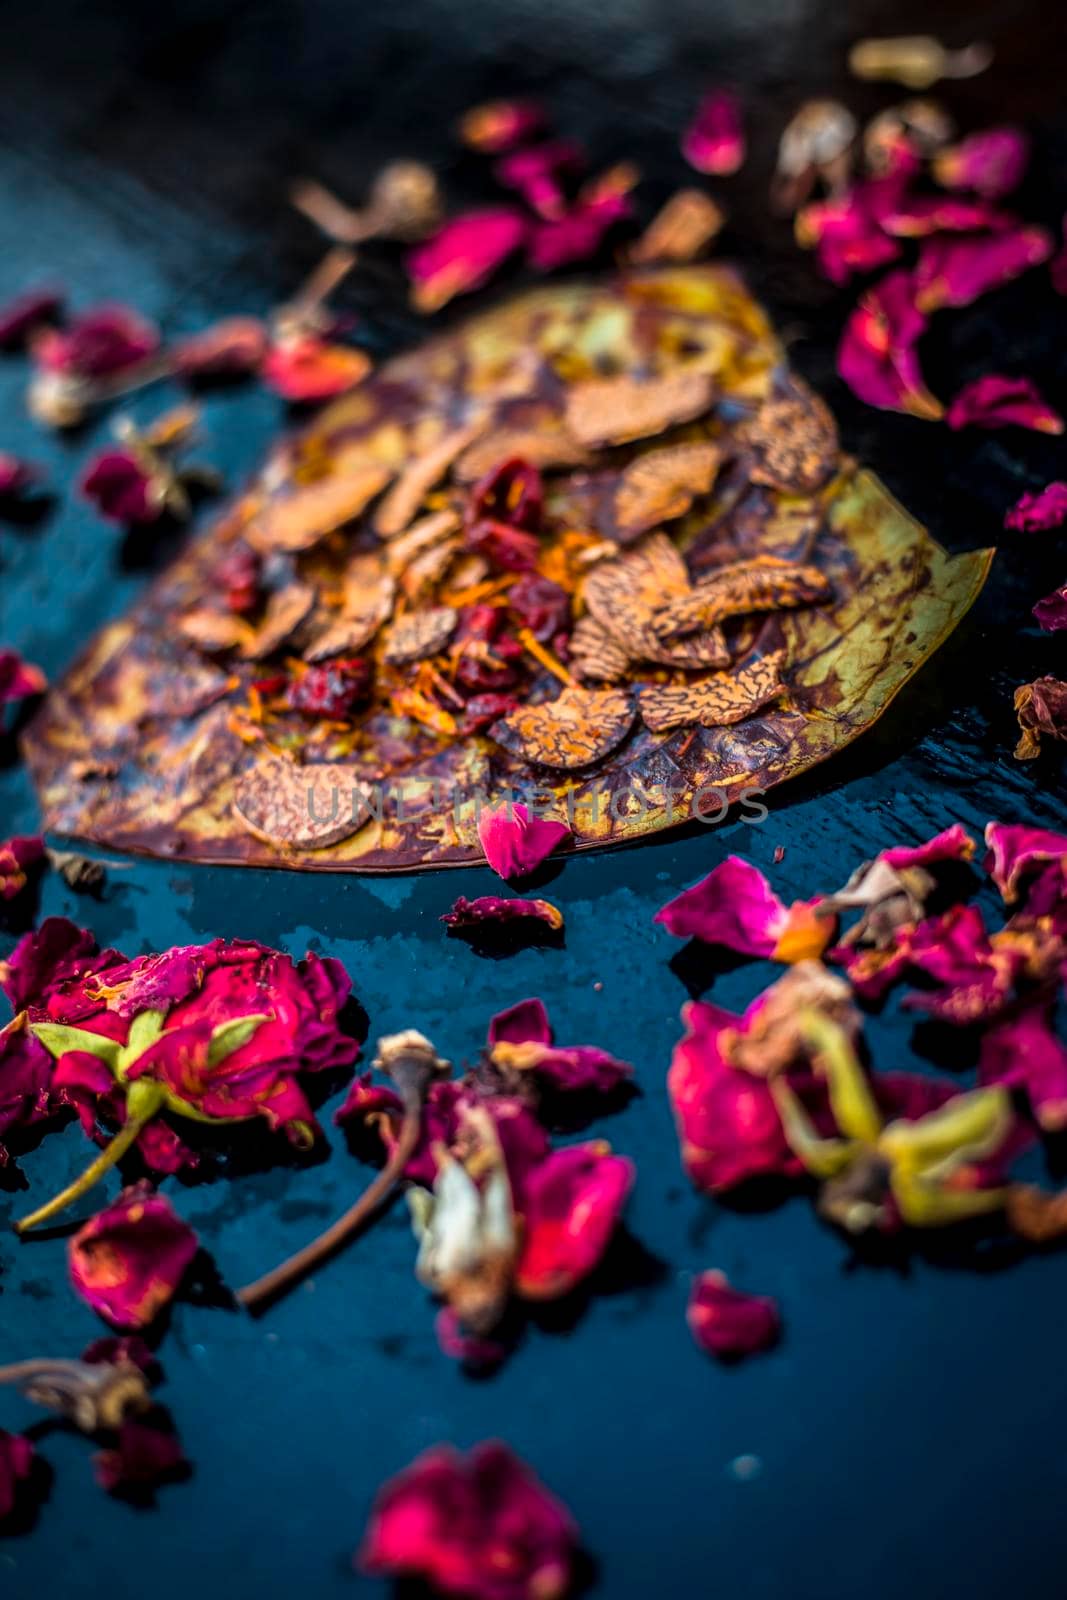 Close up of Famous Indian traditional masala pan or meetha pan on black surface with some rose water consisting of coated sauf,supari,sweeteners and some coconut powder.